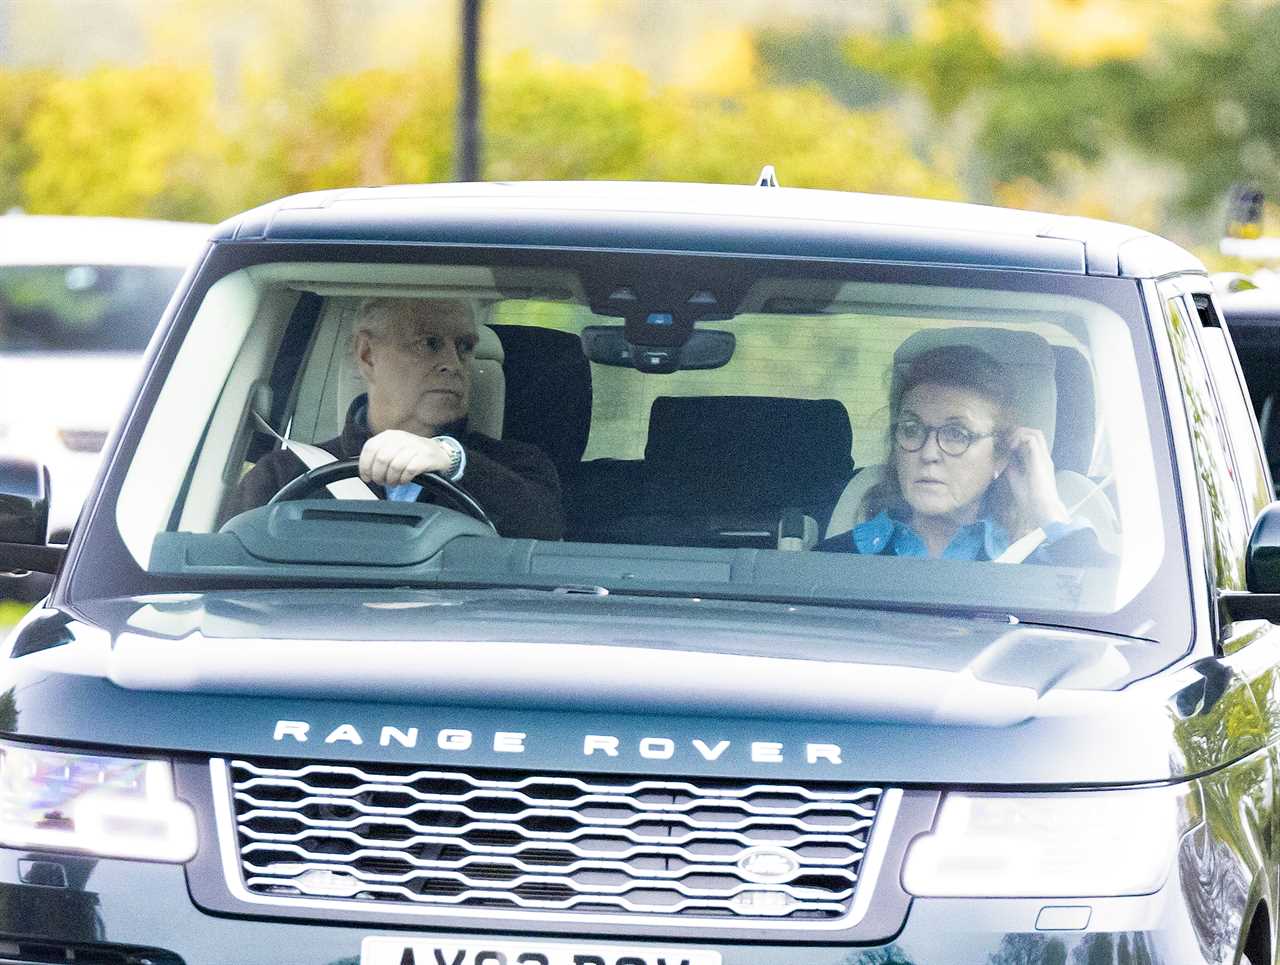 Prince Andrew and Sarah Ferguson spotted for first time after Ghislaine Maxwell’s sensational jail interview